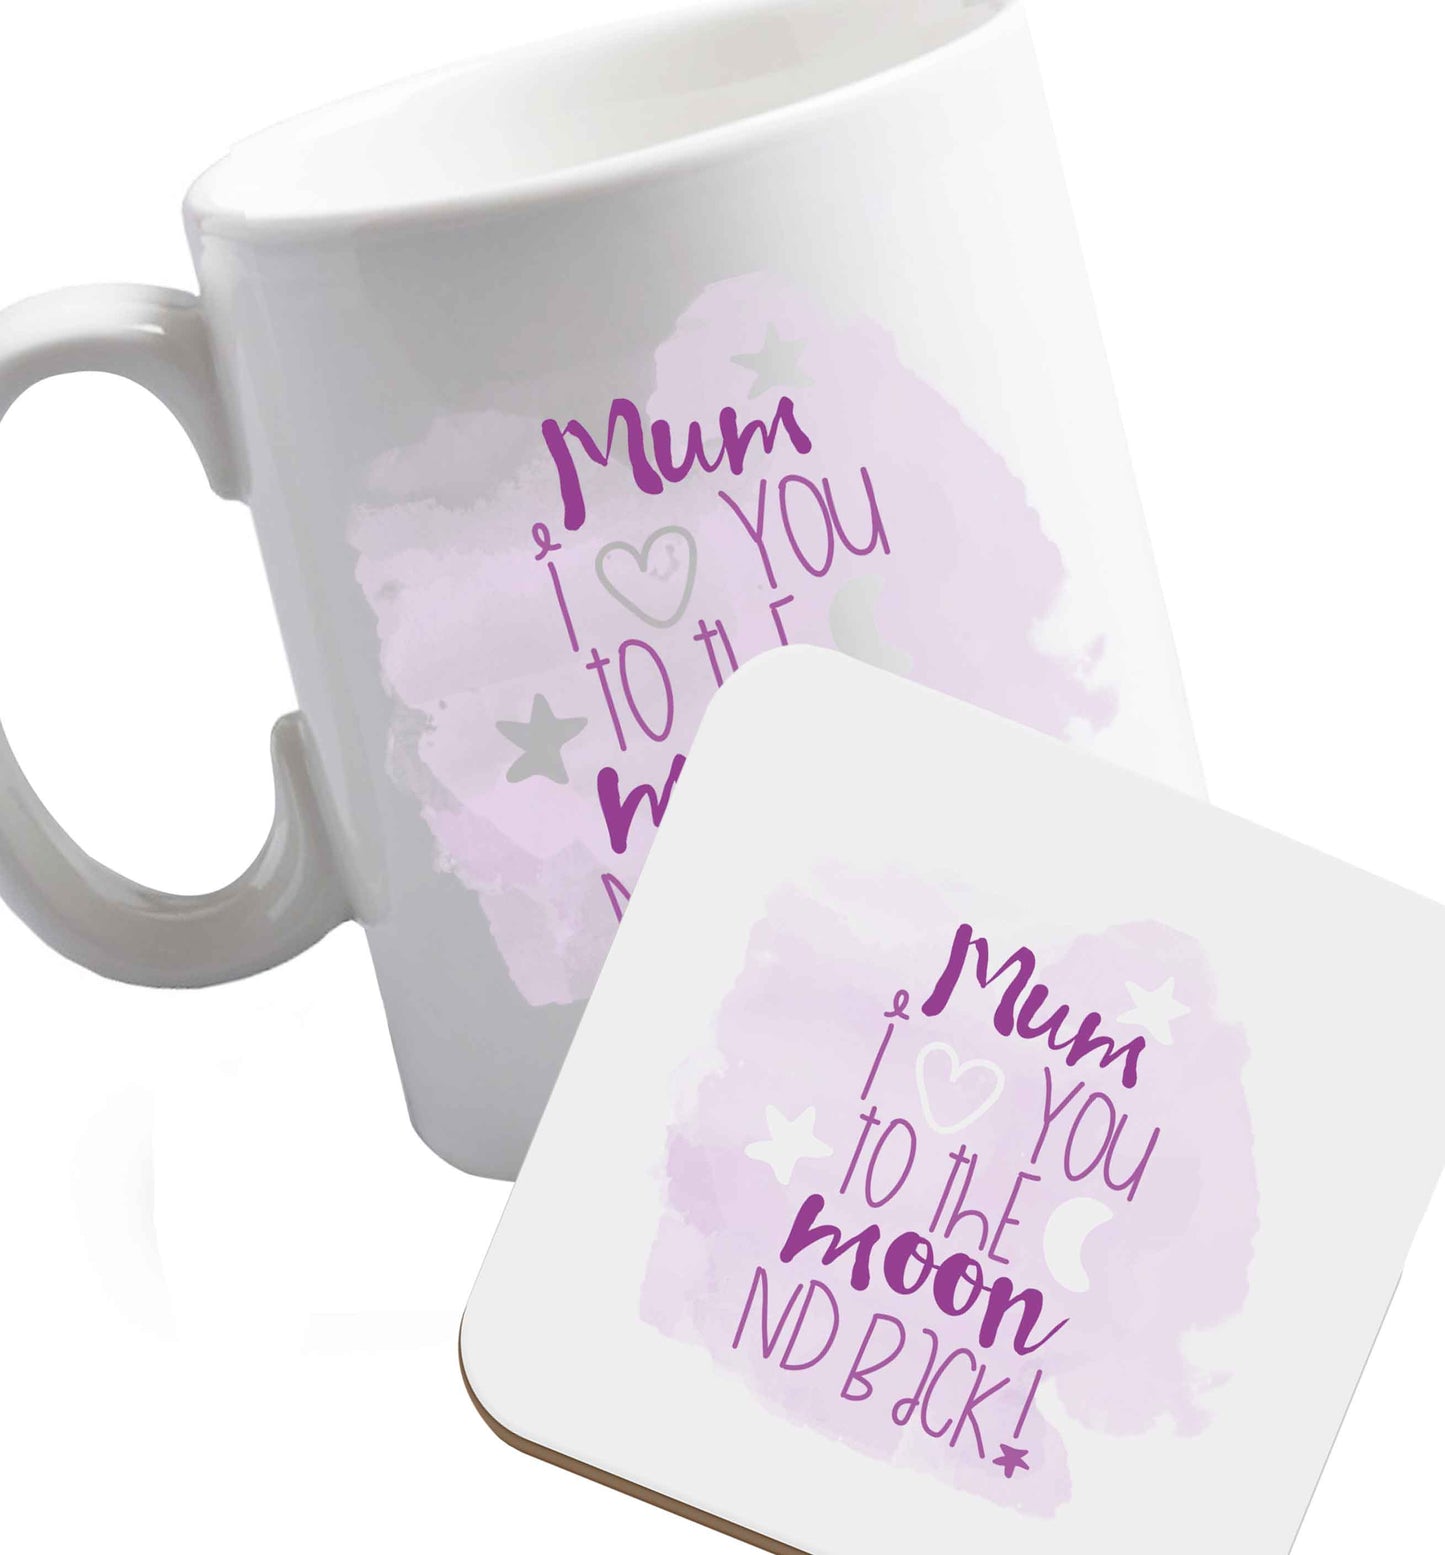 10 oz Mum I love you to the moon and back ceramic mug and coaster set right handed